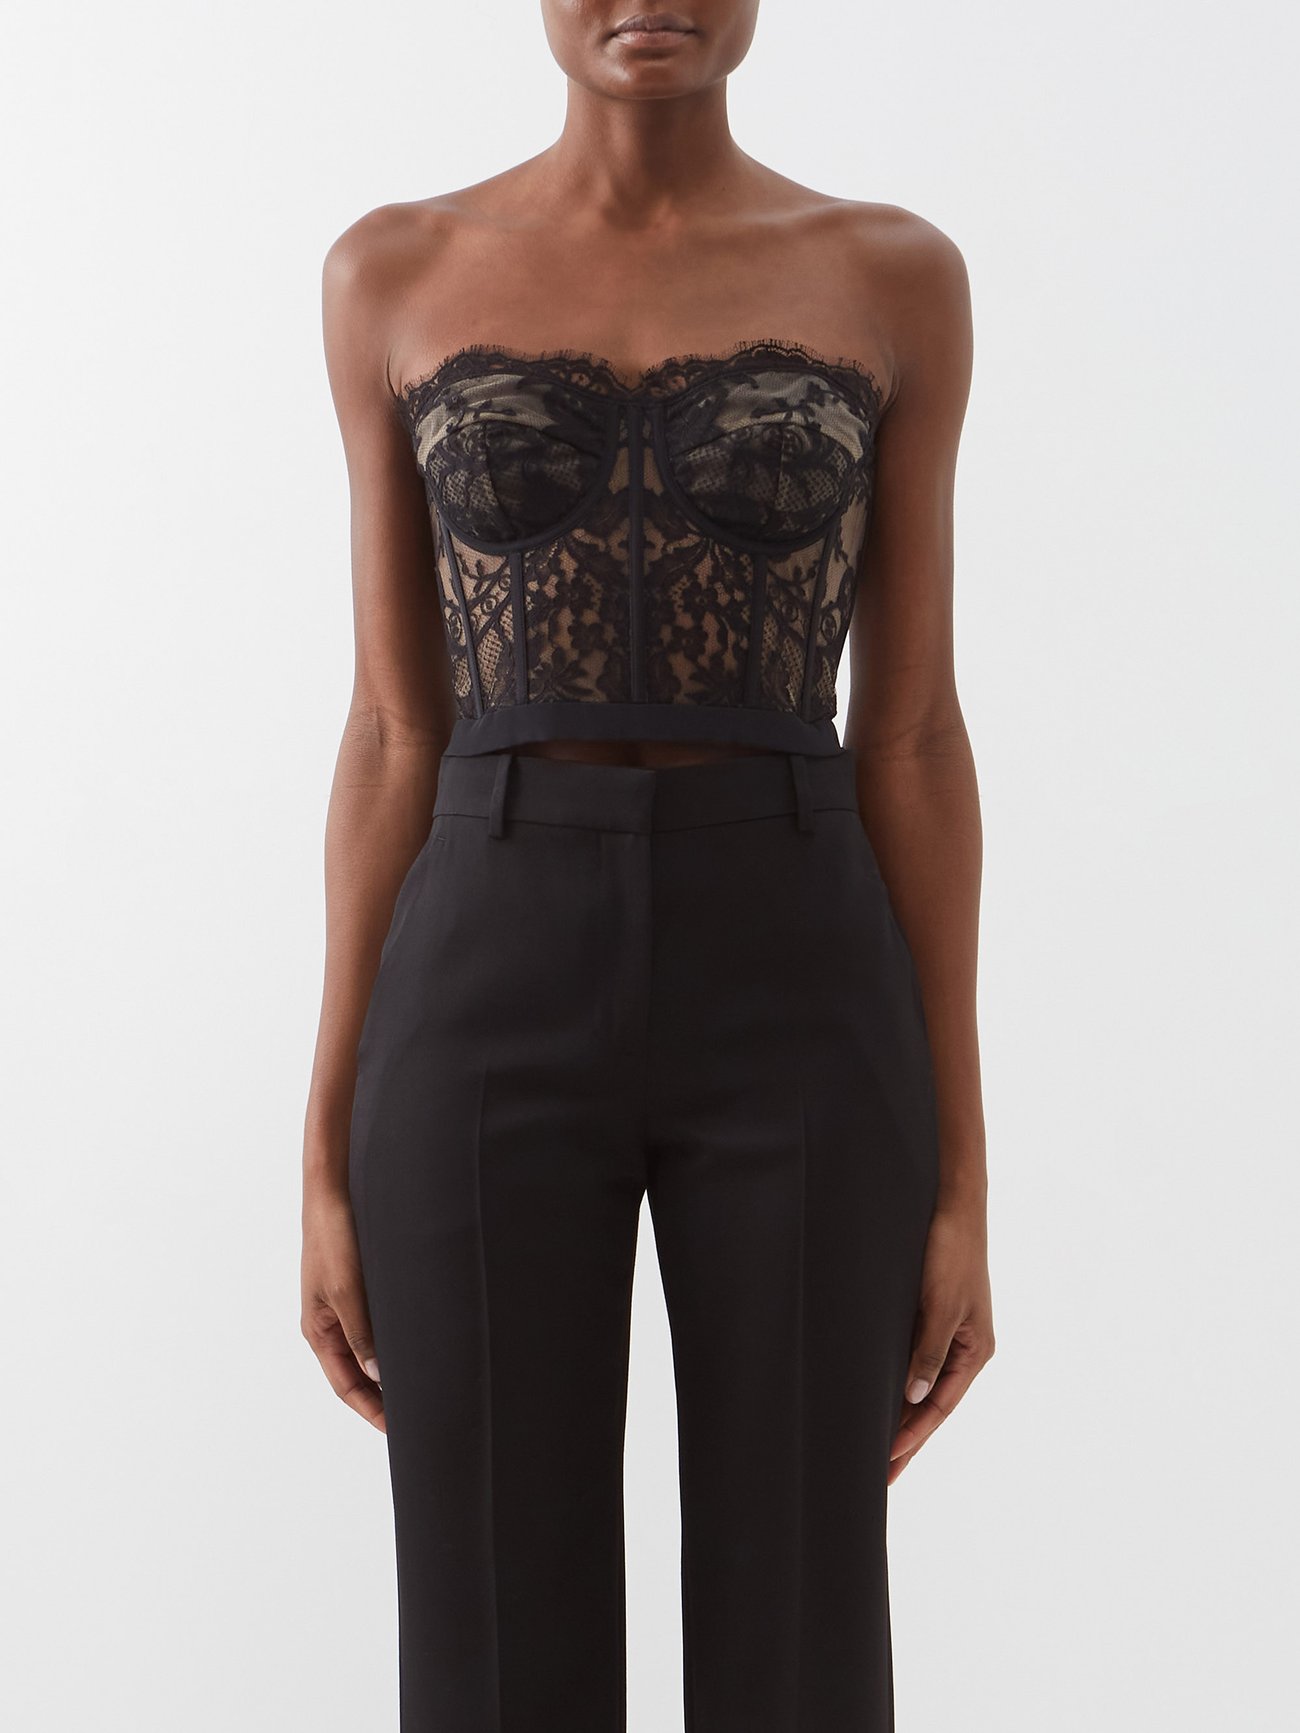 Lace bustier top